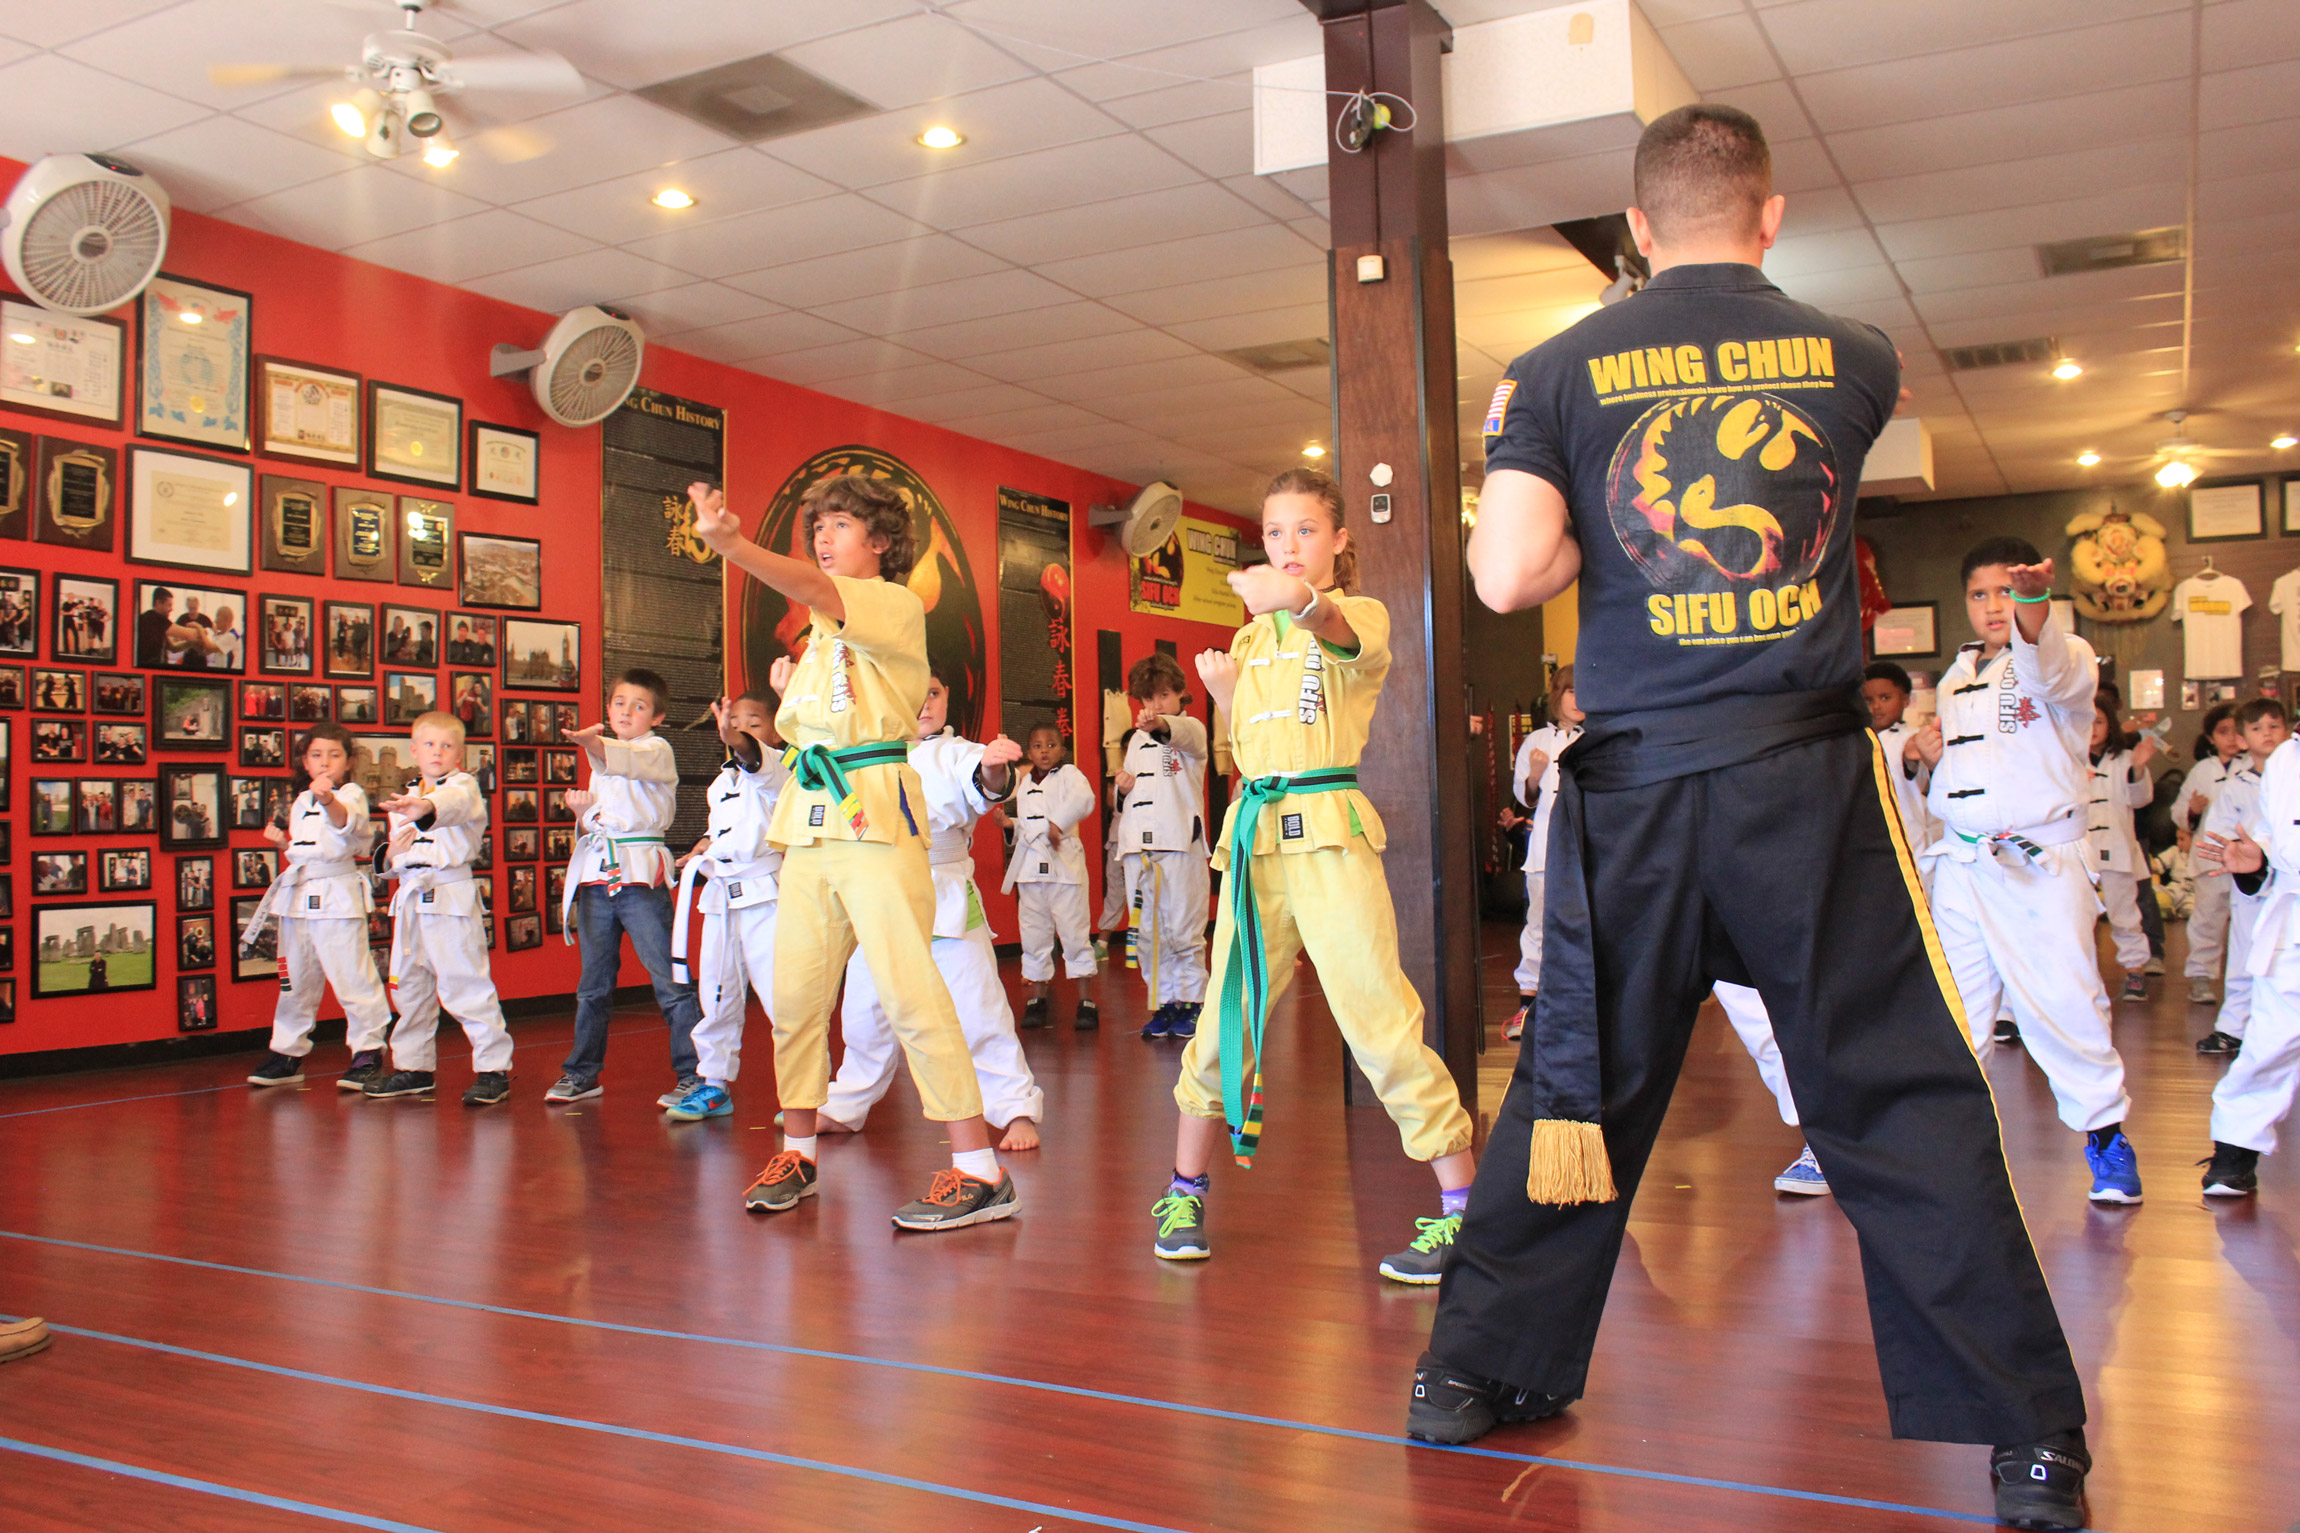 martial arts students lined up in uniform following wing chun instructor